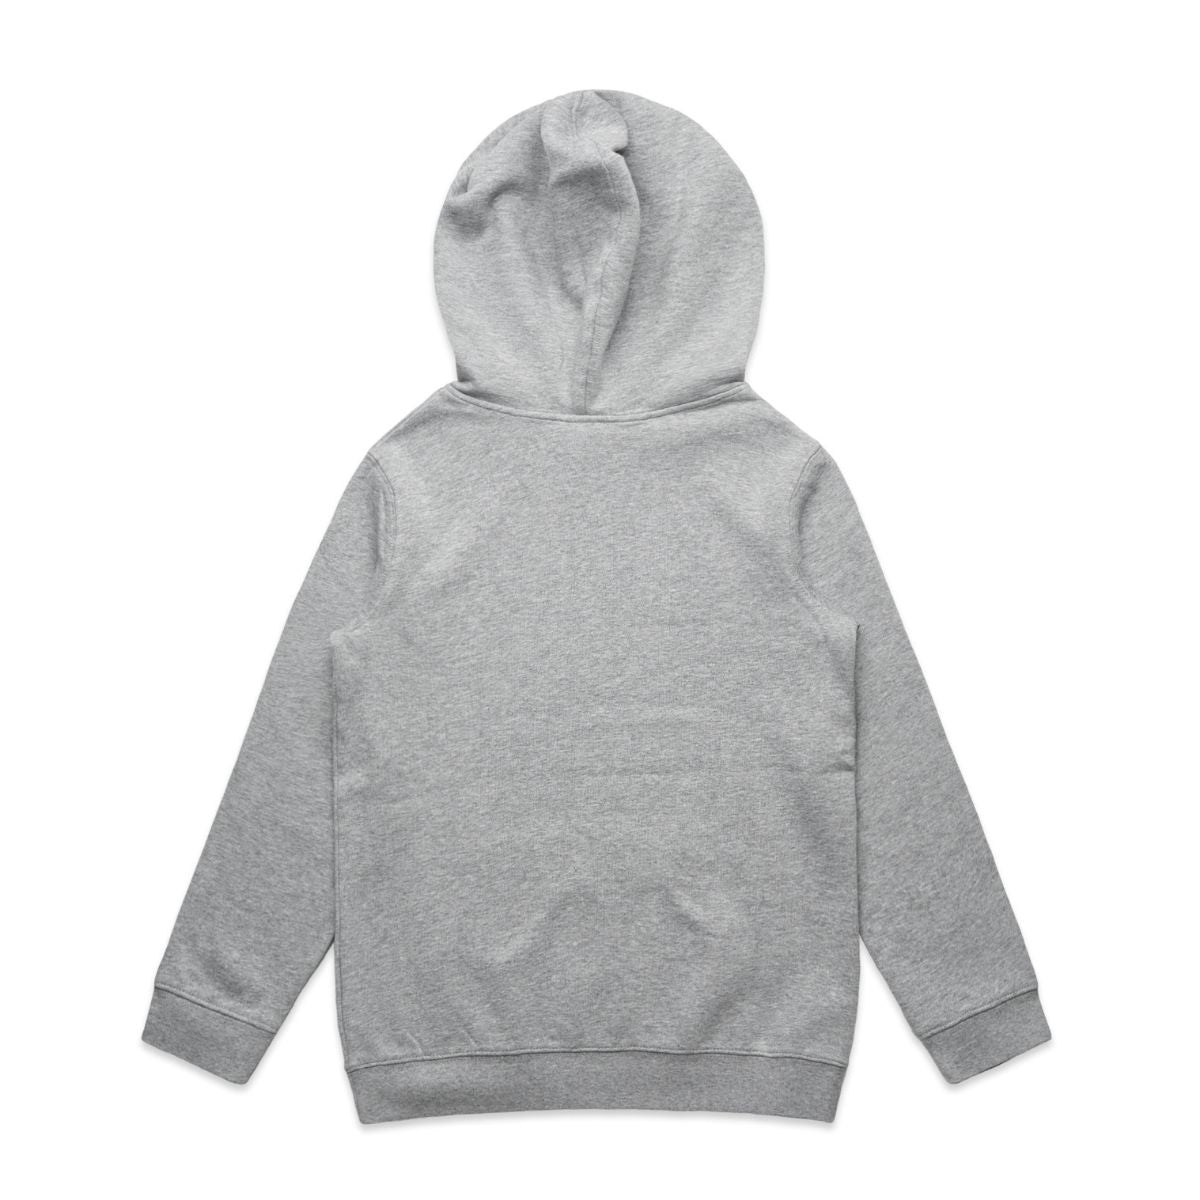 ascolour Youth Supply Hood 3033